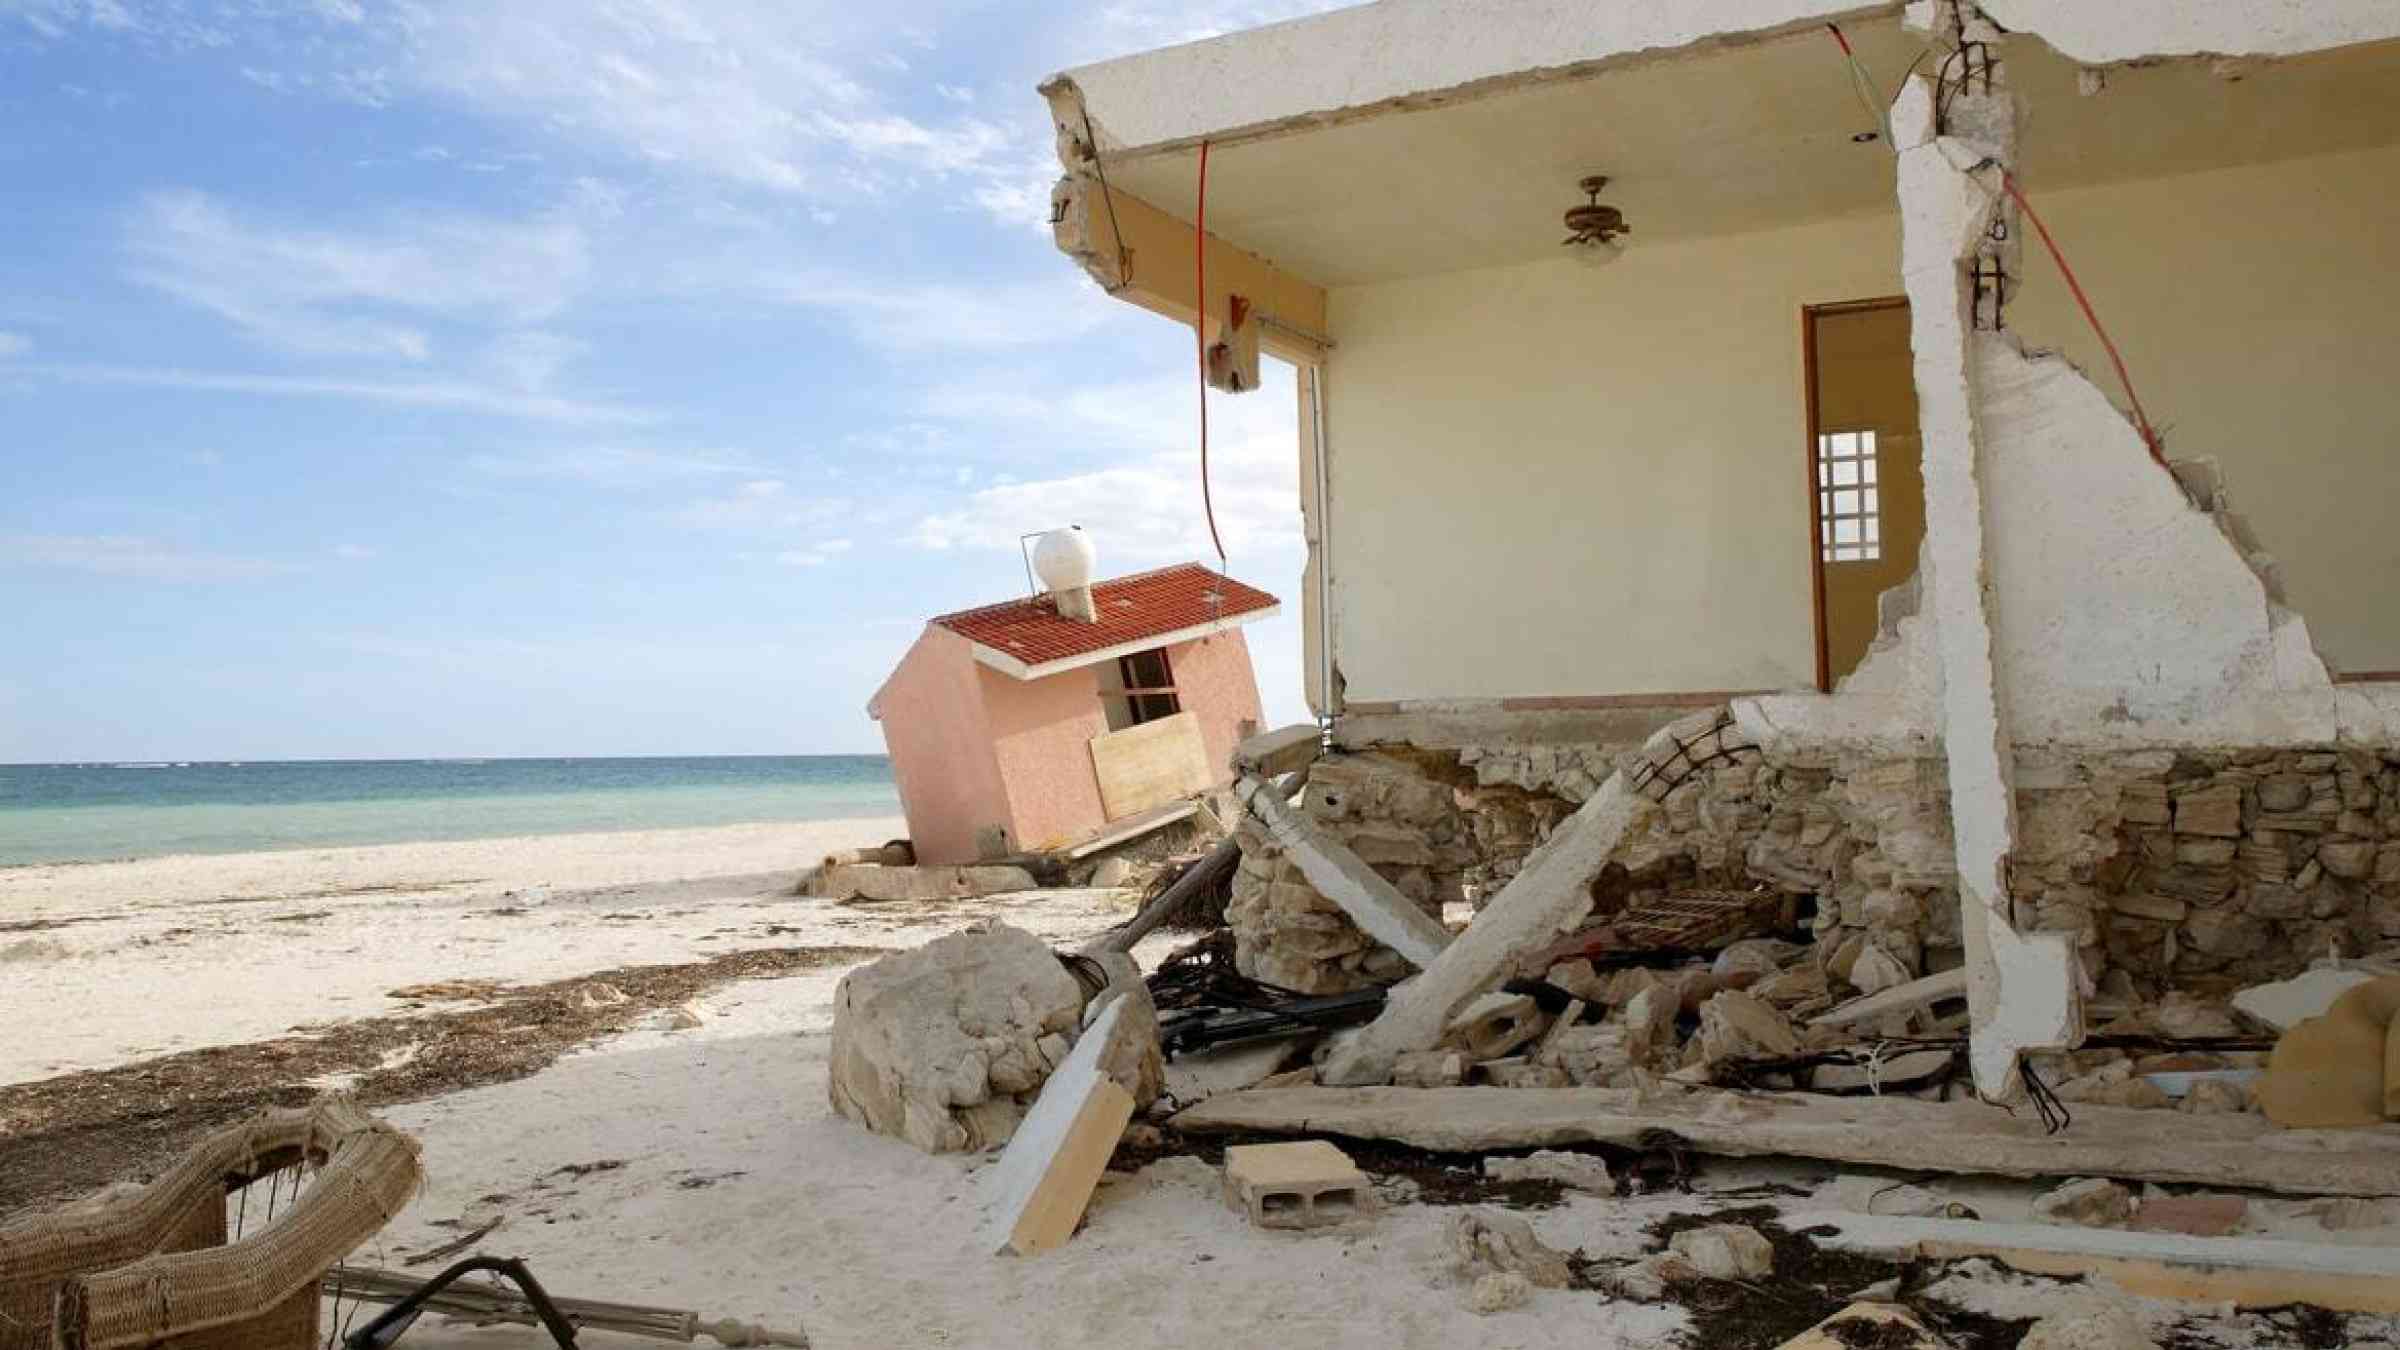 Destroyed houses on a beachfront after a hurricane